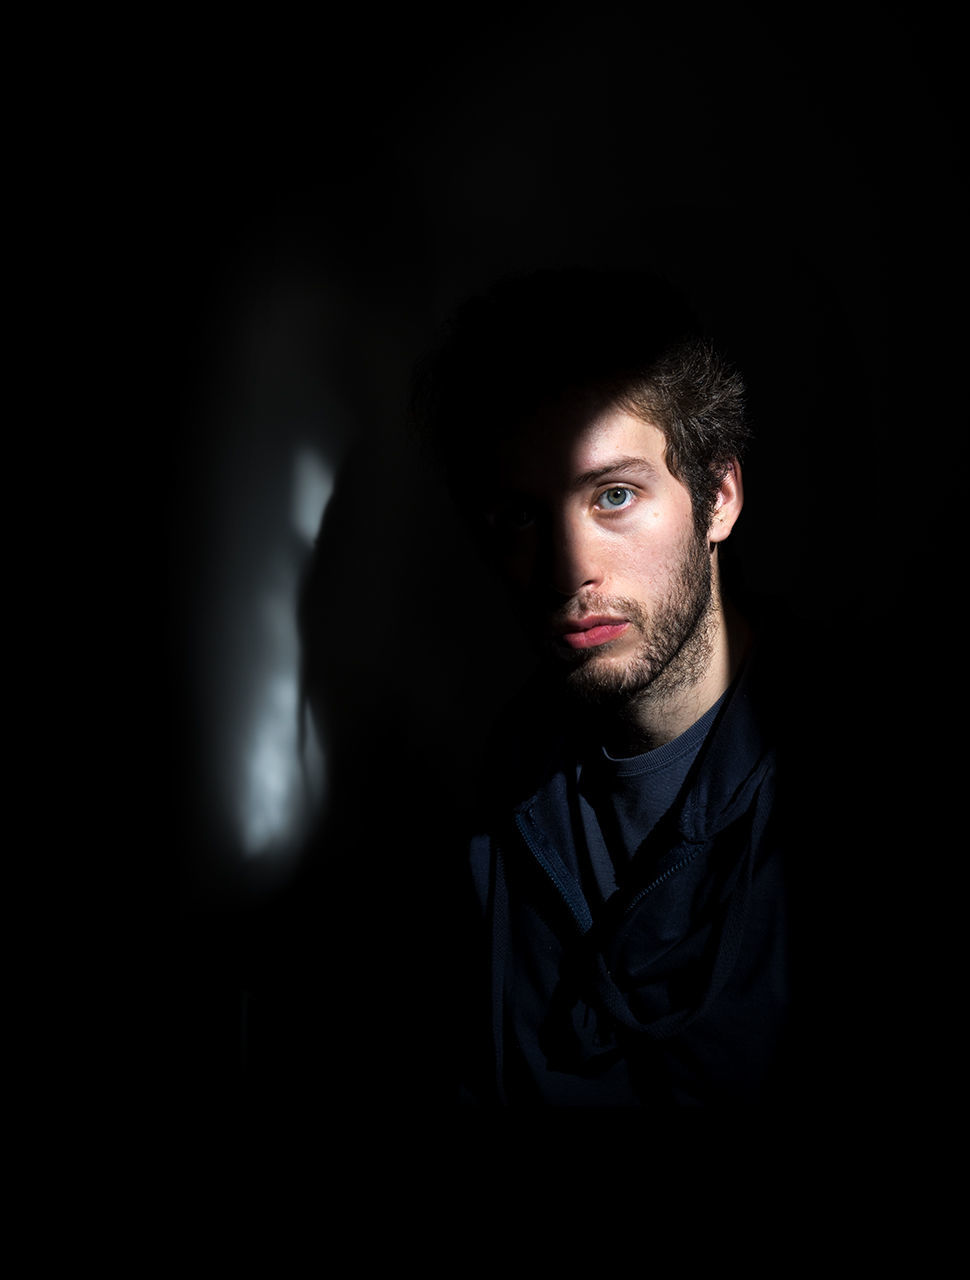 one person, portrait, beard, indoors, front view, dark, looking at camera, headshot, young adult, facial hair, young men, real people, lifestyles, men, black background, mid adult, adult, looking, contemplation, human face